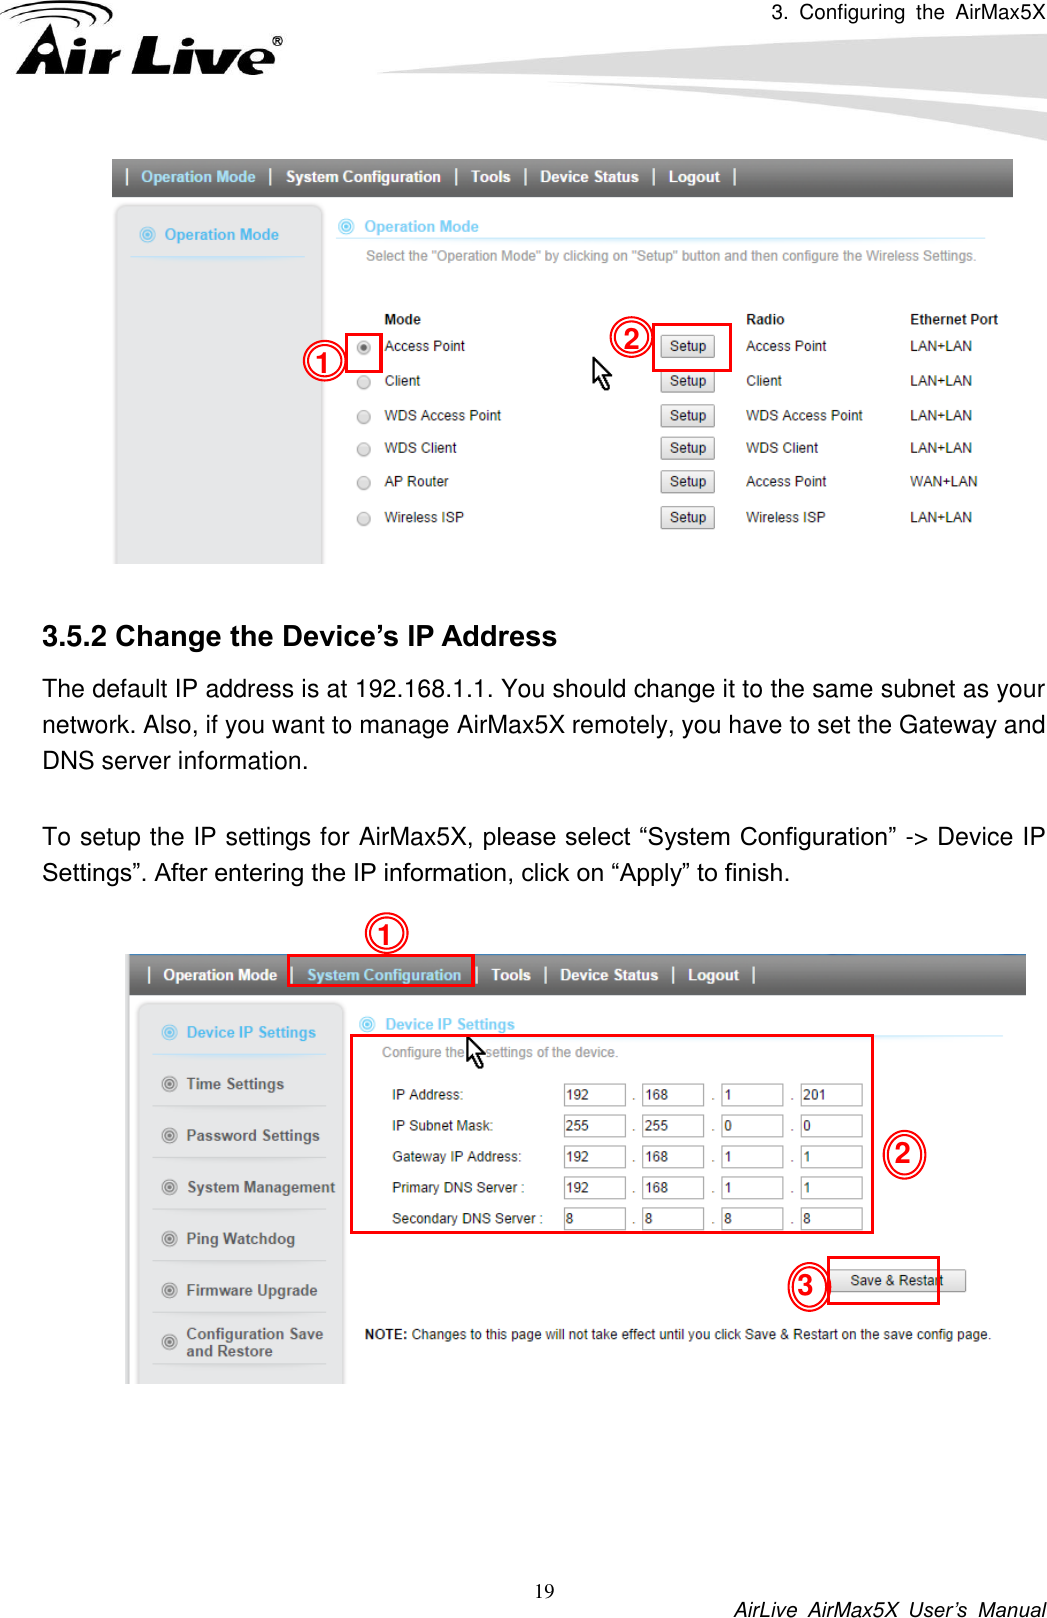 3.  Configuring  the  AirMax5X           AirLive  AirMax5X  User’s  Manual 19     3.5.2 Change the Device’s IP Address   The default IP address is at 192.168.1.1. You should change it to the same subnet as your network. Also, if you want to manage AirMax5X remotely, you have to set the Gateway and DNS server information.  To setup the IP settings for AirMax5X, please select “System Configuration” -&gt; Device IP Settings”. After entering the IP information, click on “Apply” to finish.       1 1 2 3 2 